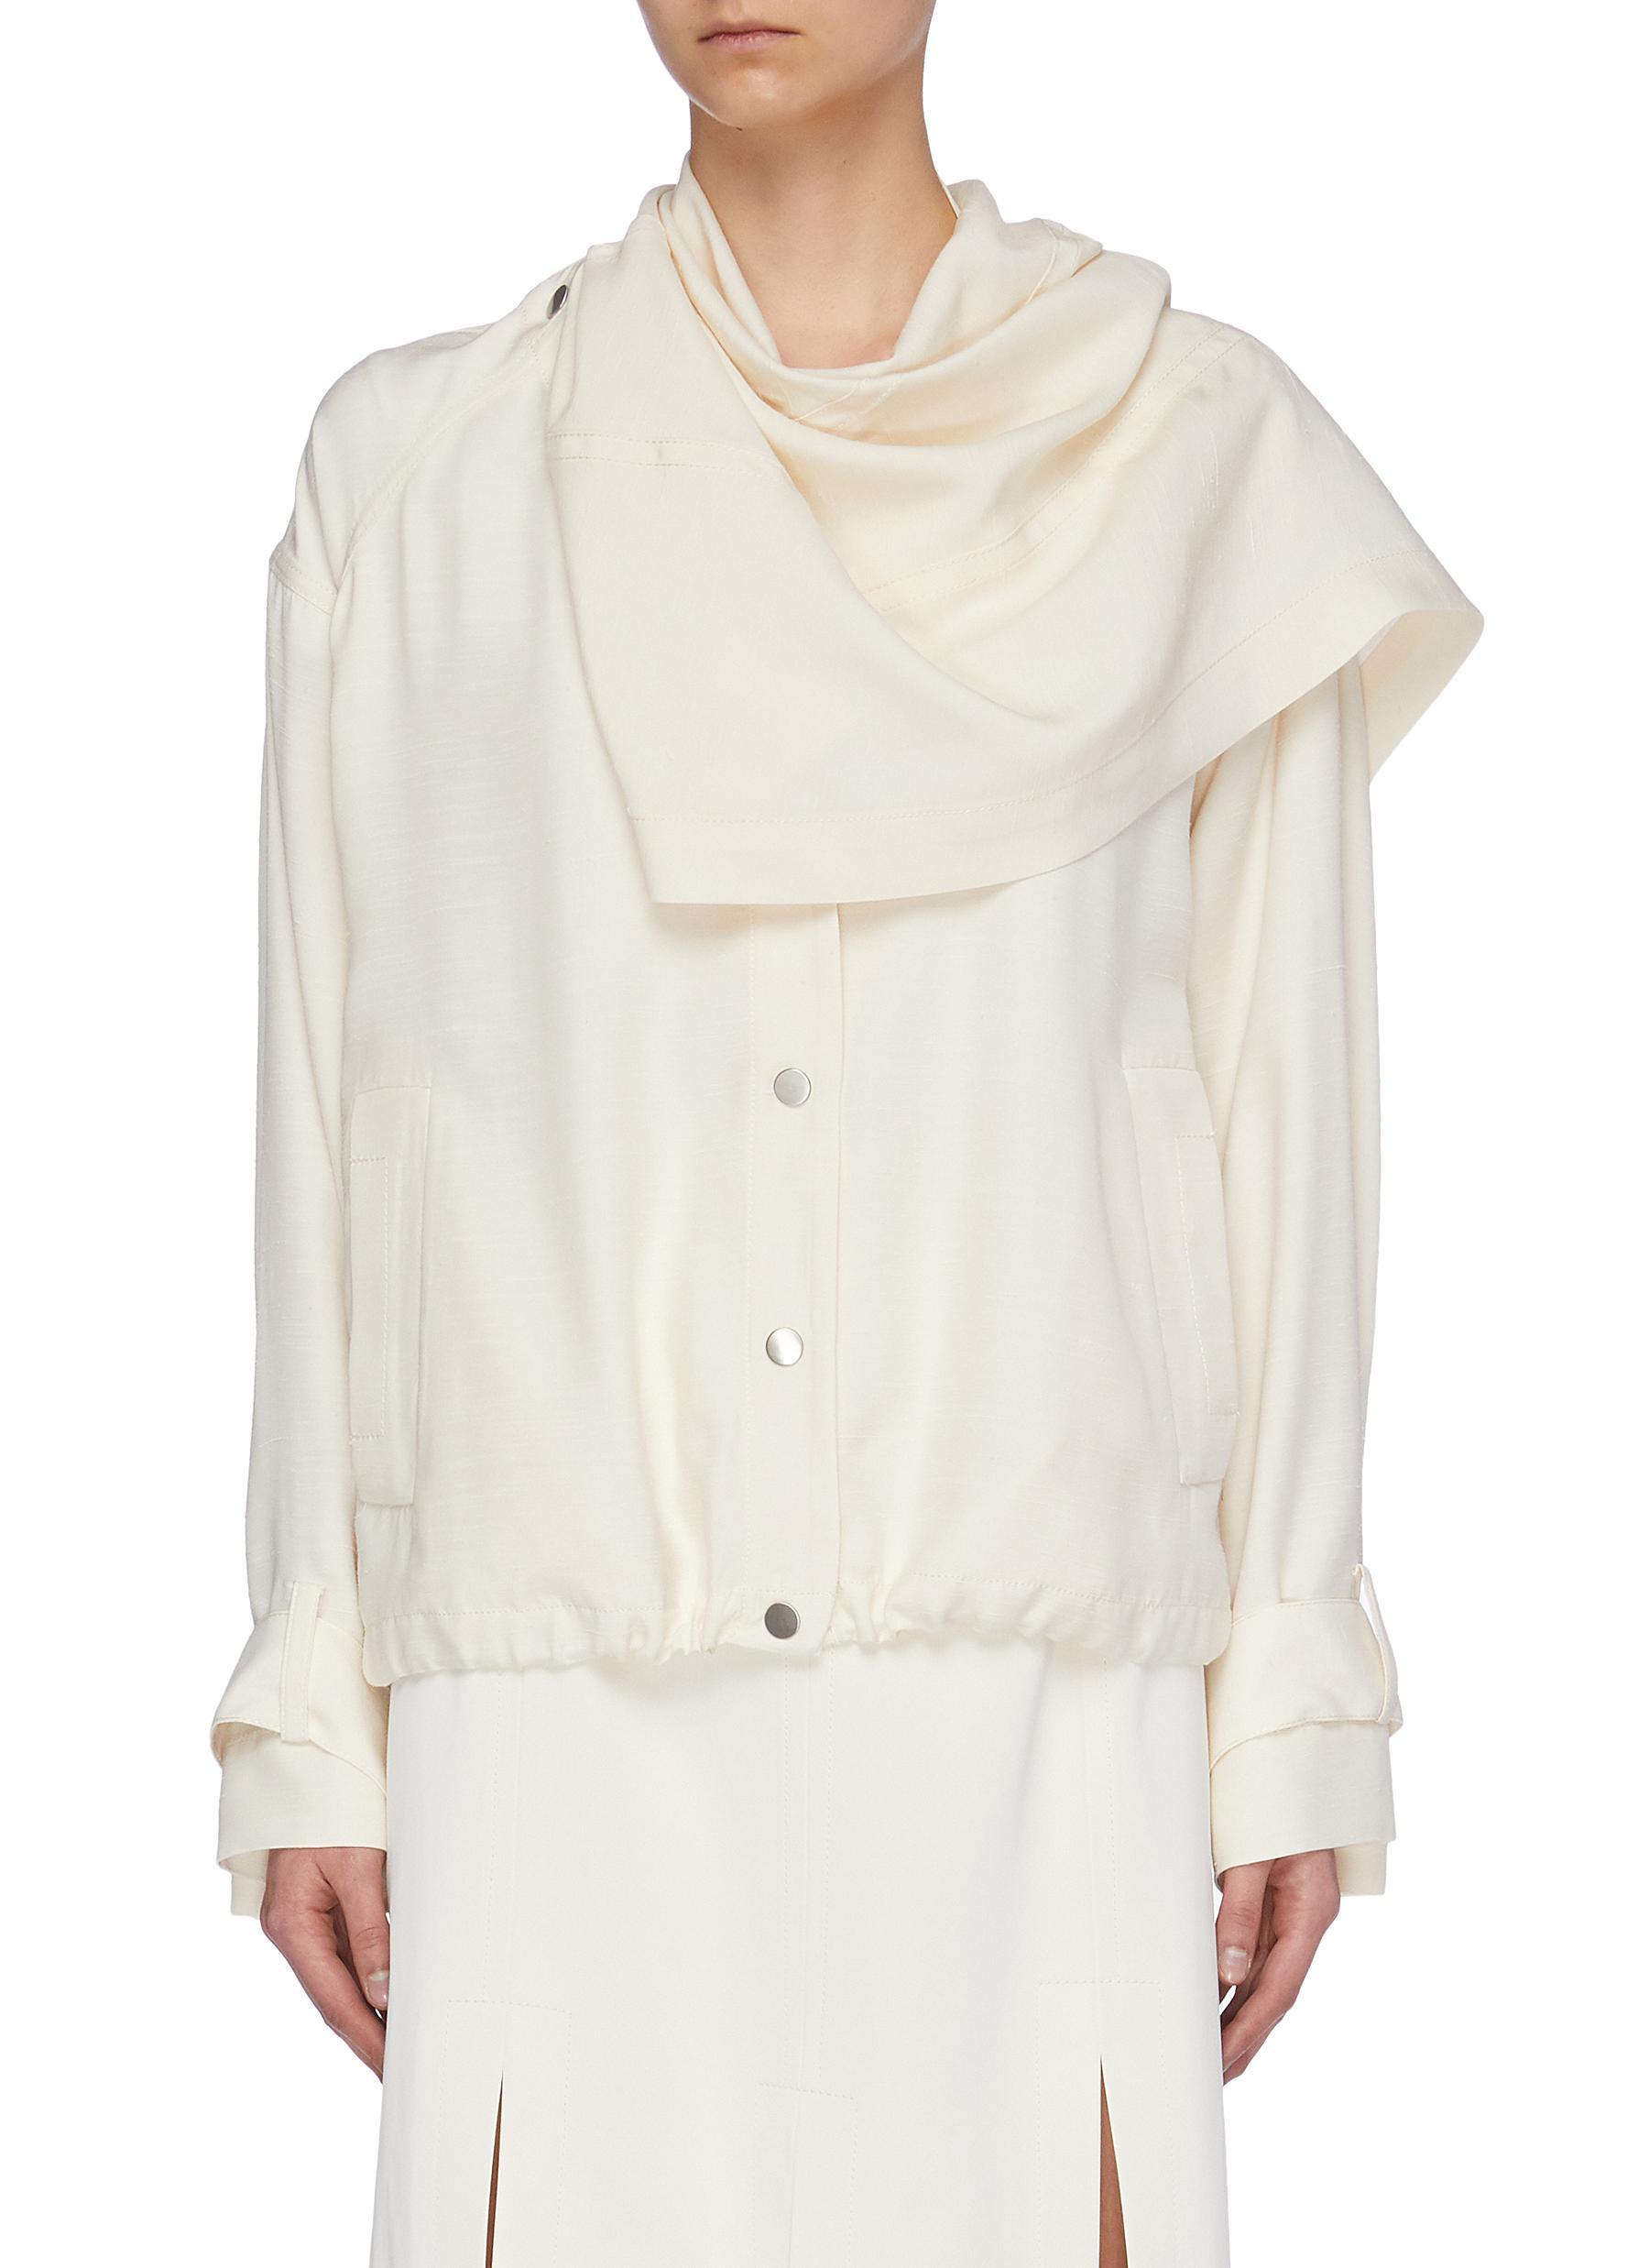 3.1 Phillip Lim Synthetic Detachable Scarf Panel Sateen Jacket in White for  Men - Lyst